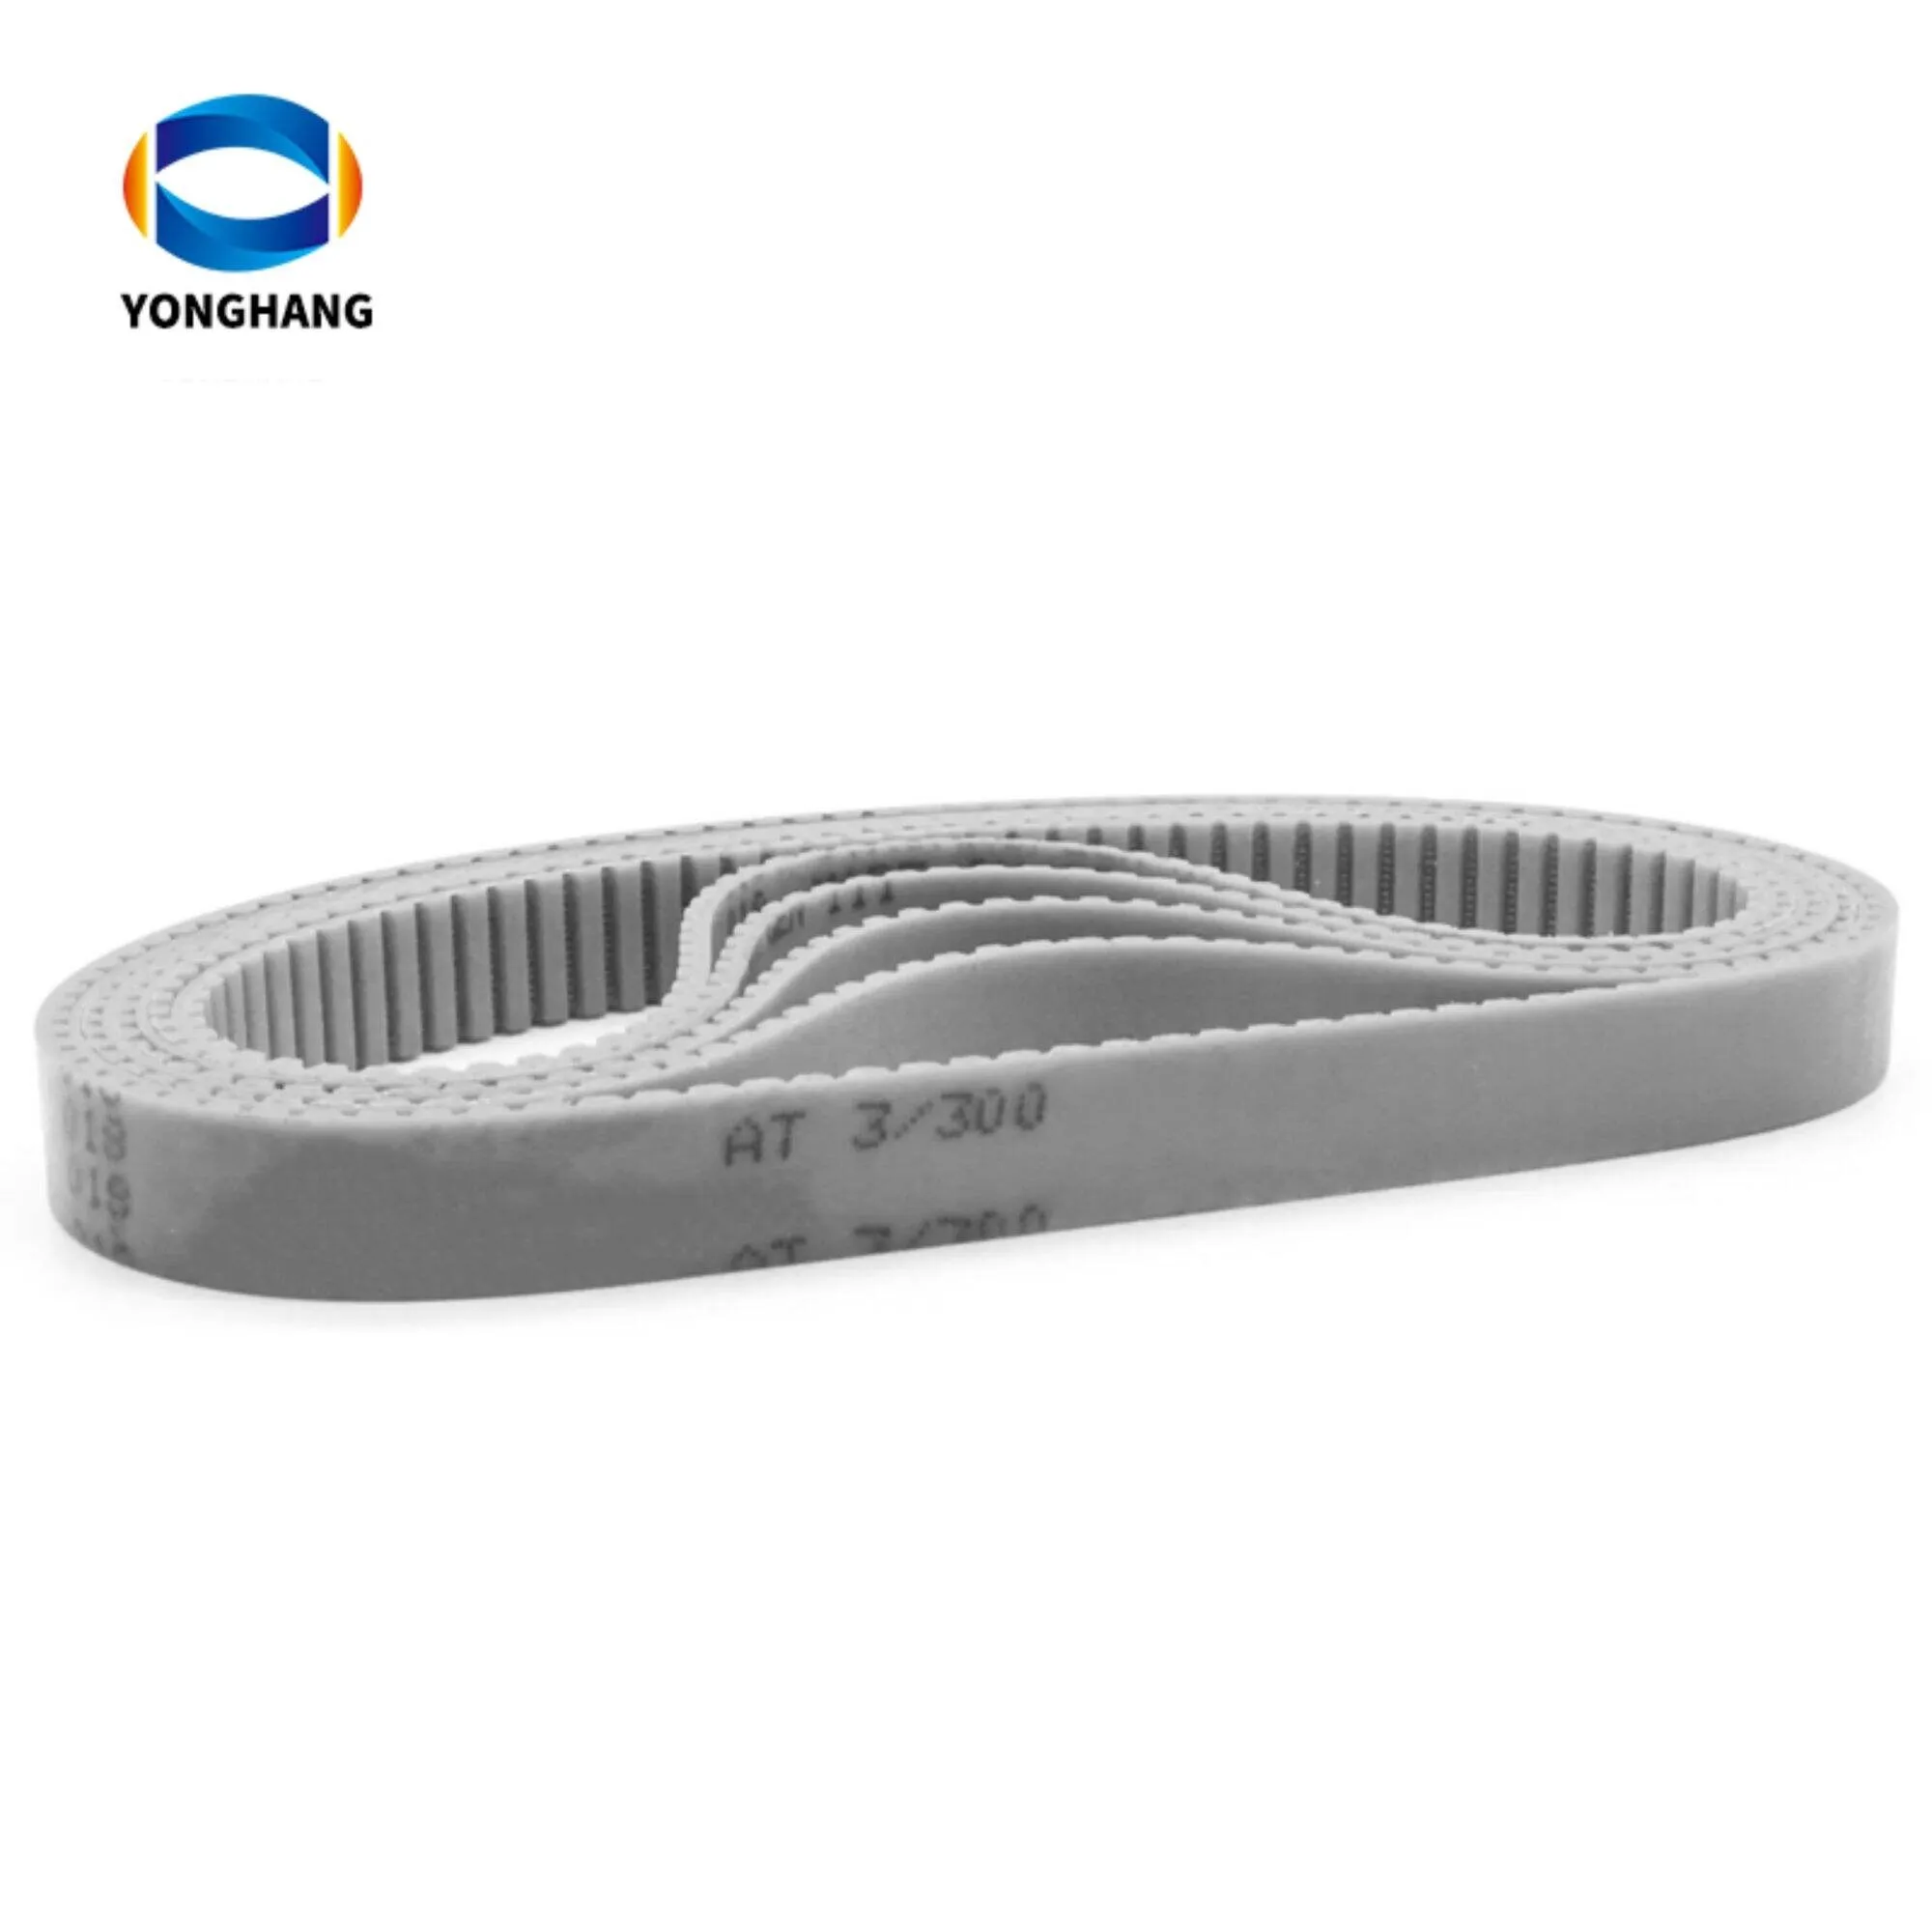 Understanding the Role of a Transmission Belt in Machinery